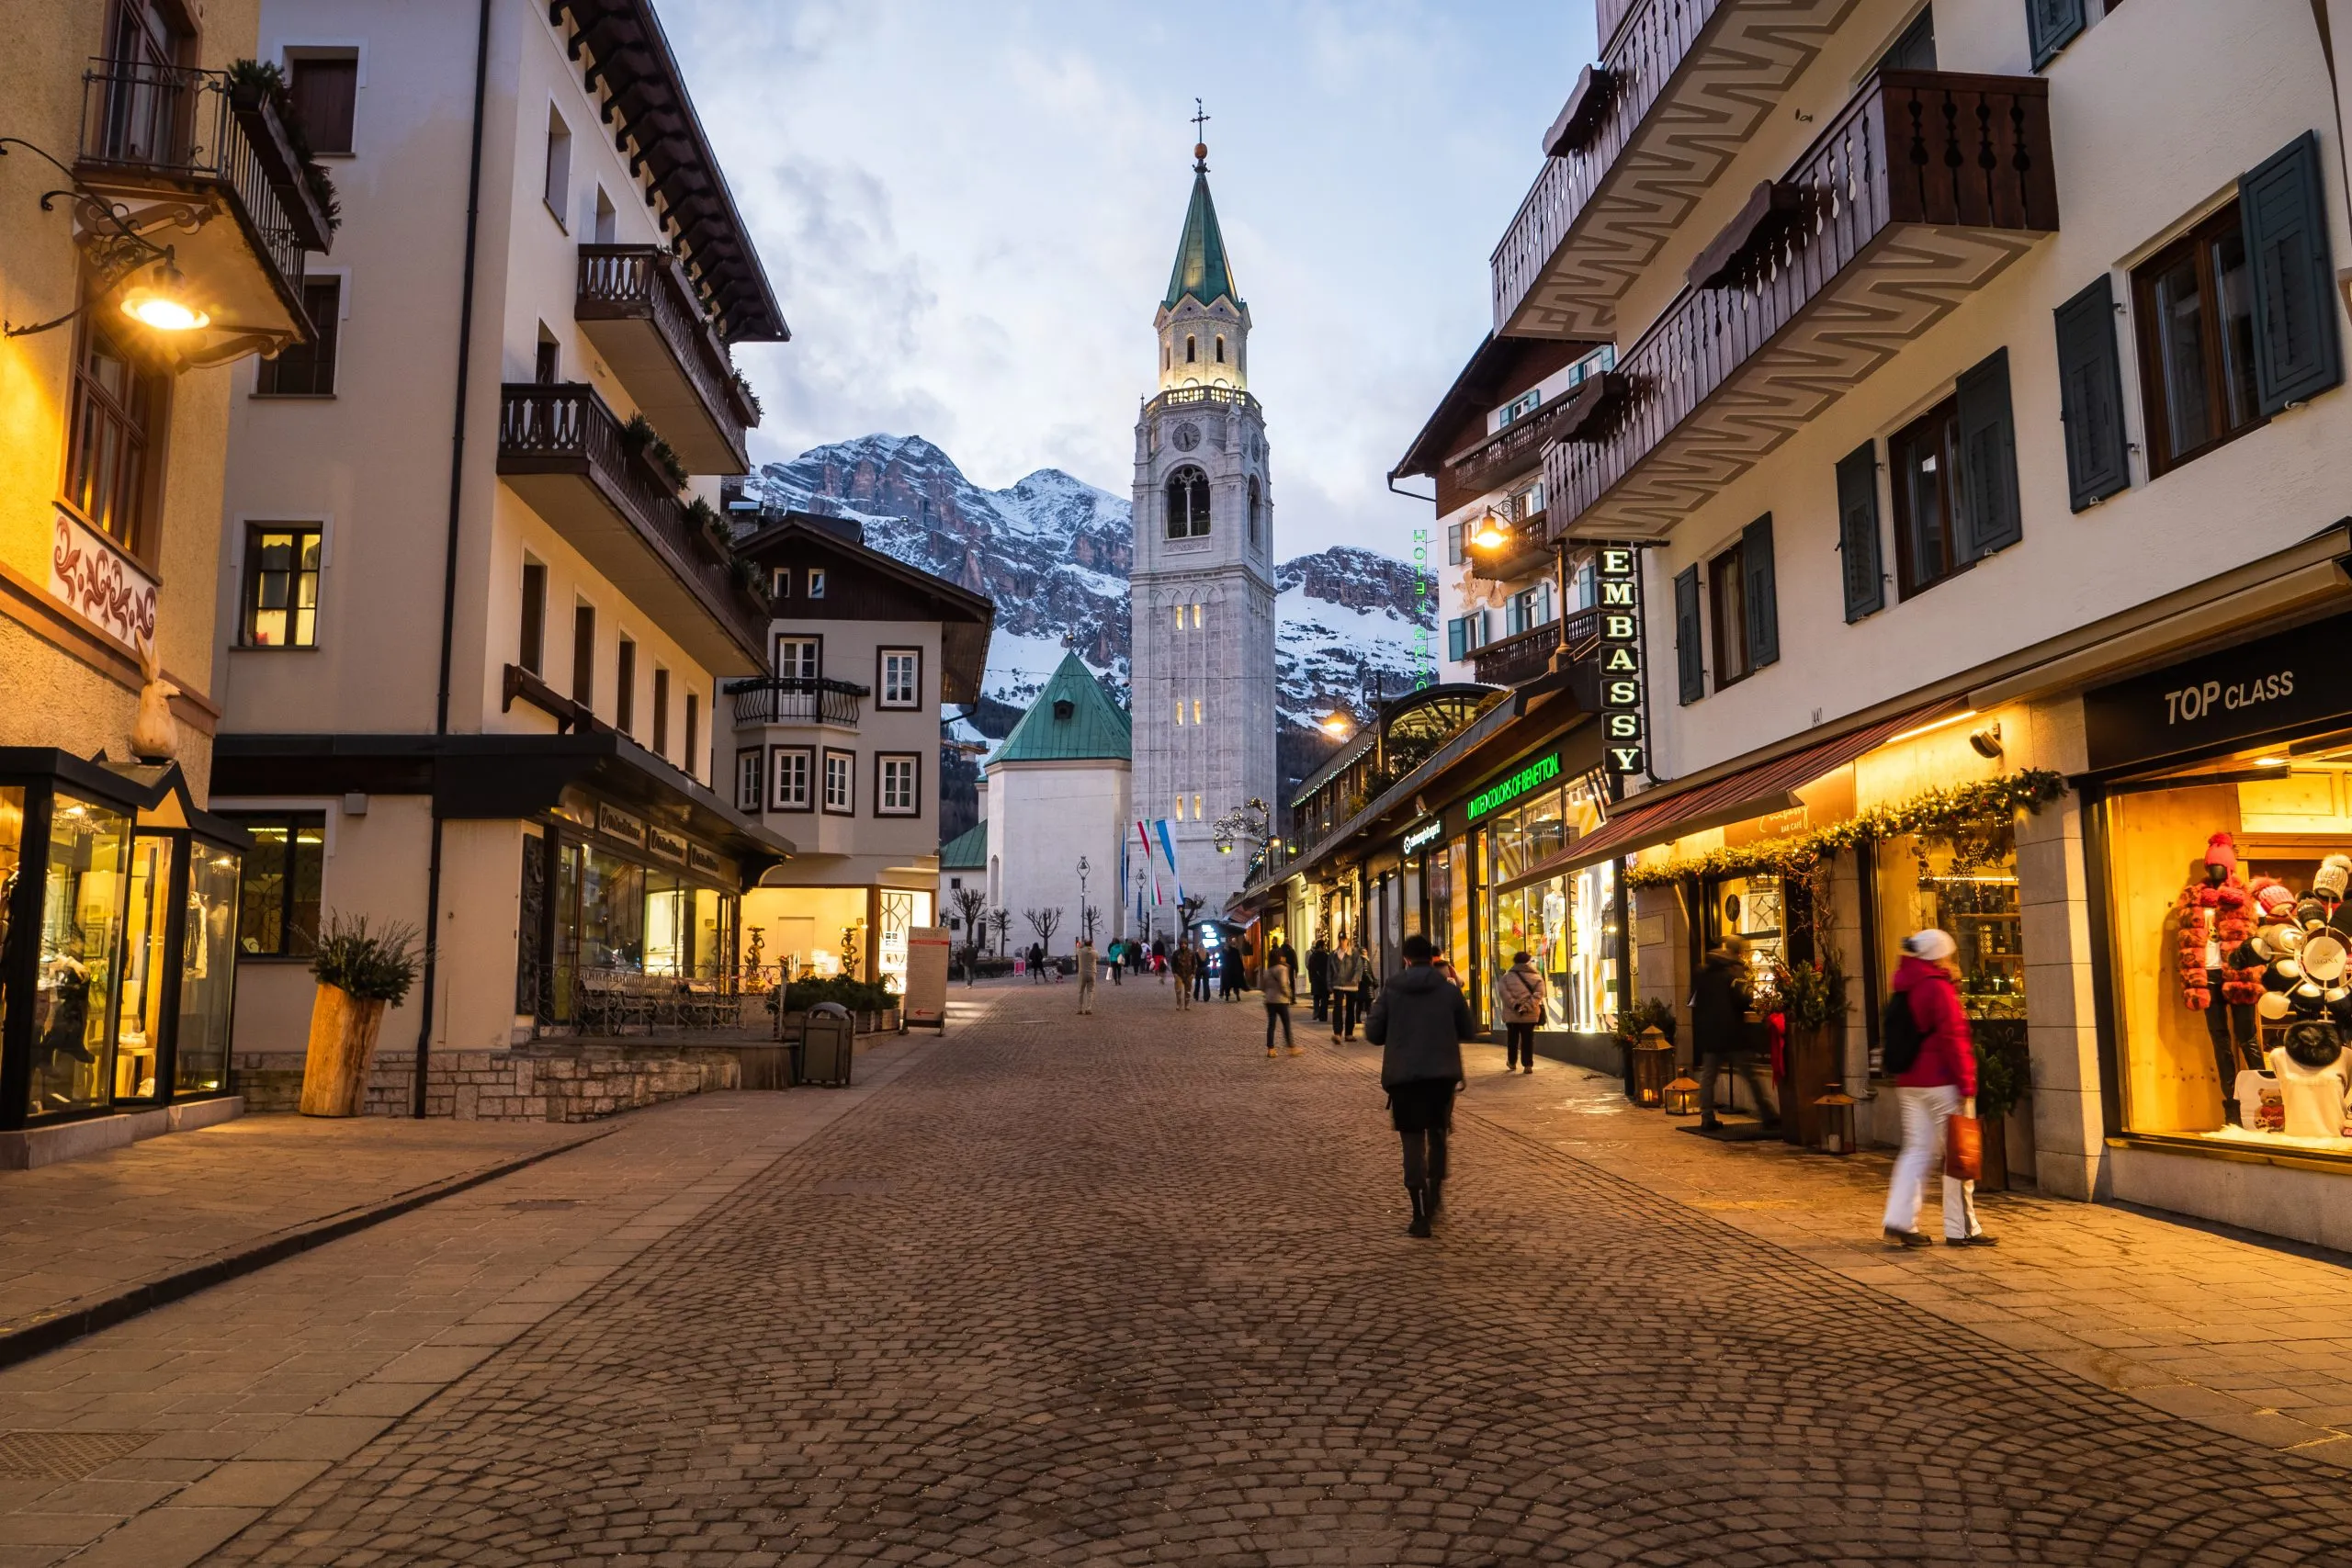 Cortina d'Ampezzo, Italy - February 3 2020: Corso Italia in the Famous Ski Resort Cortina d'Ampezzo on a Winter Evening, the Main Shopping Street in the City Center, with the Spire of the Church